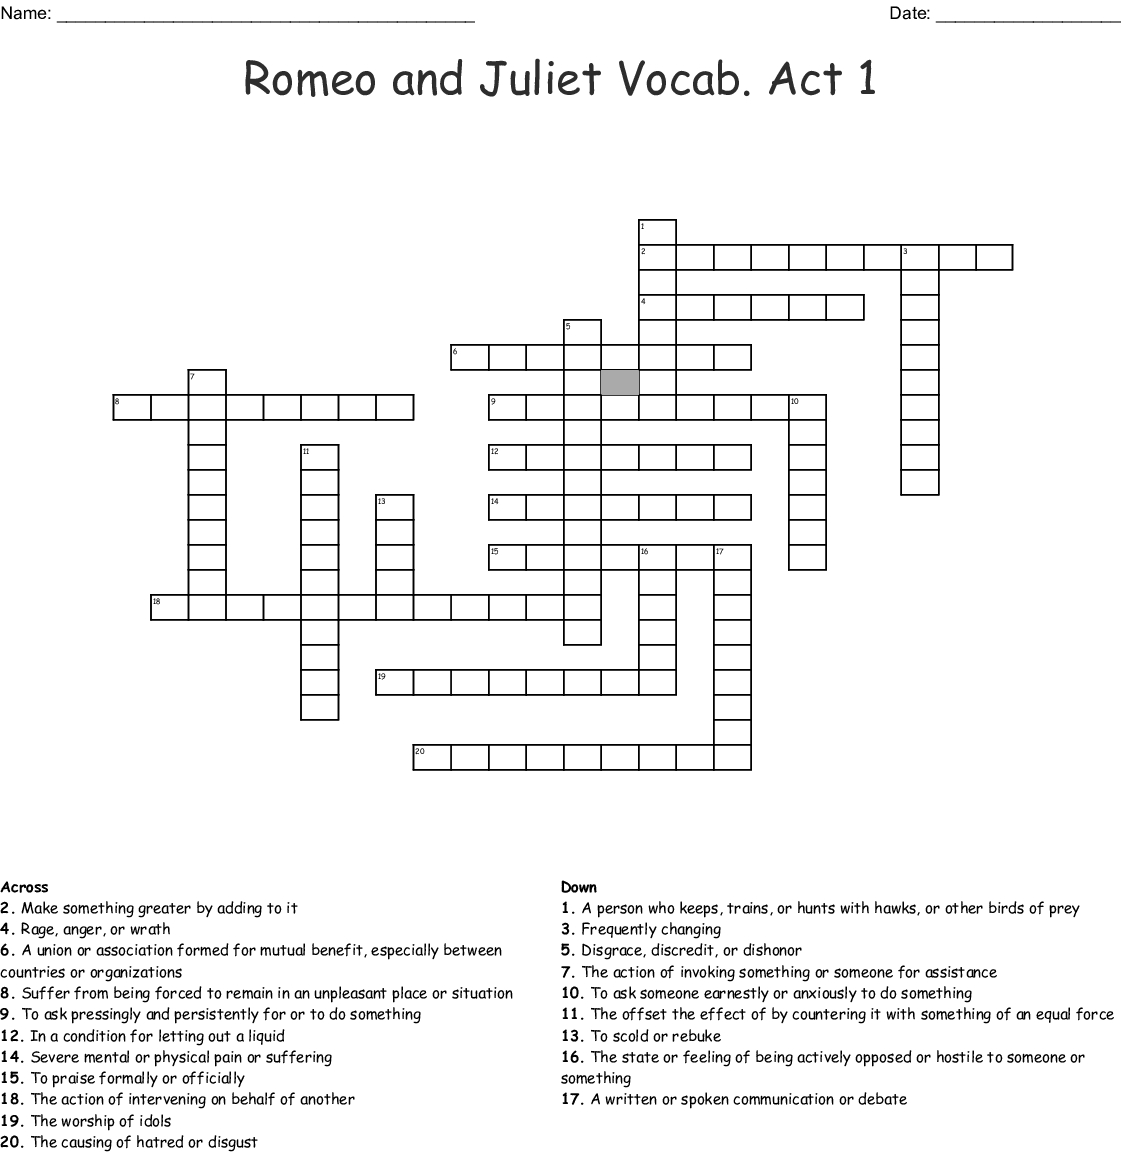 Romeo And Juliet Vocab Act 1 Crossword  Wordmint As Well As Romeo And Juliet Act 1 Vocabulary Worksheet Answers